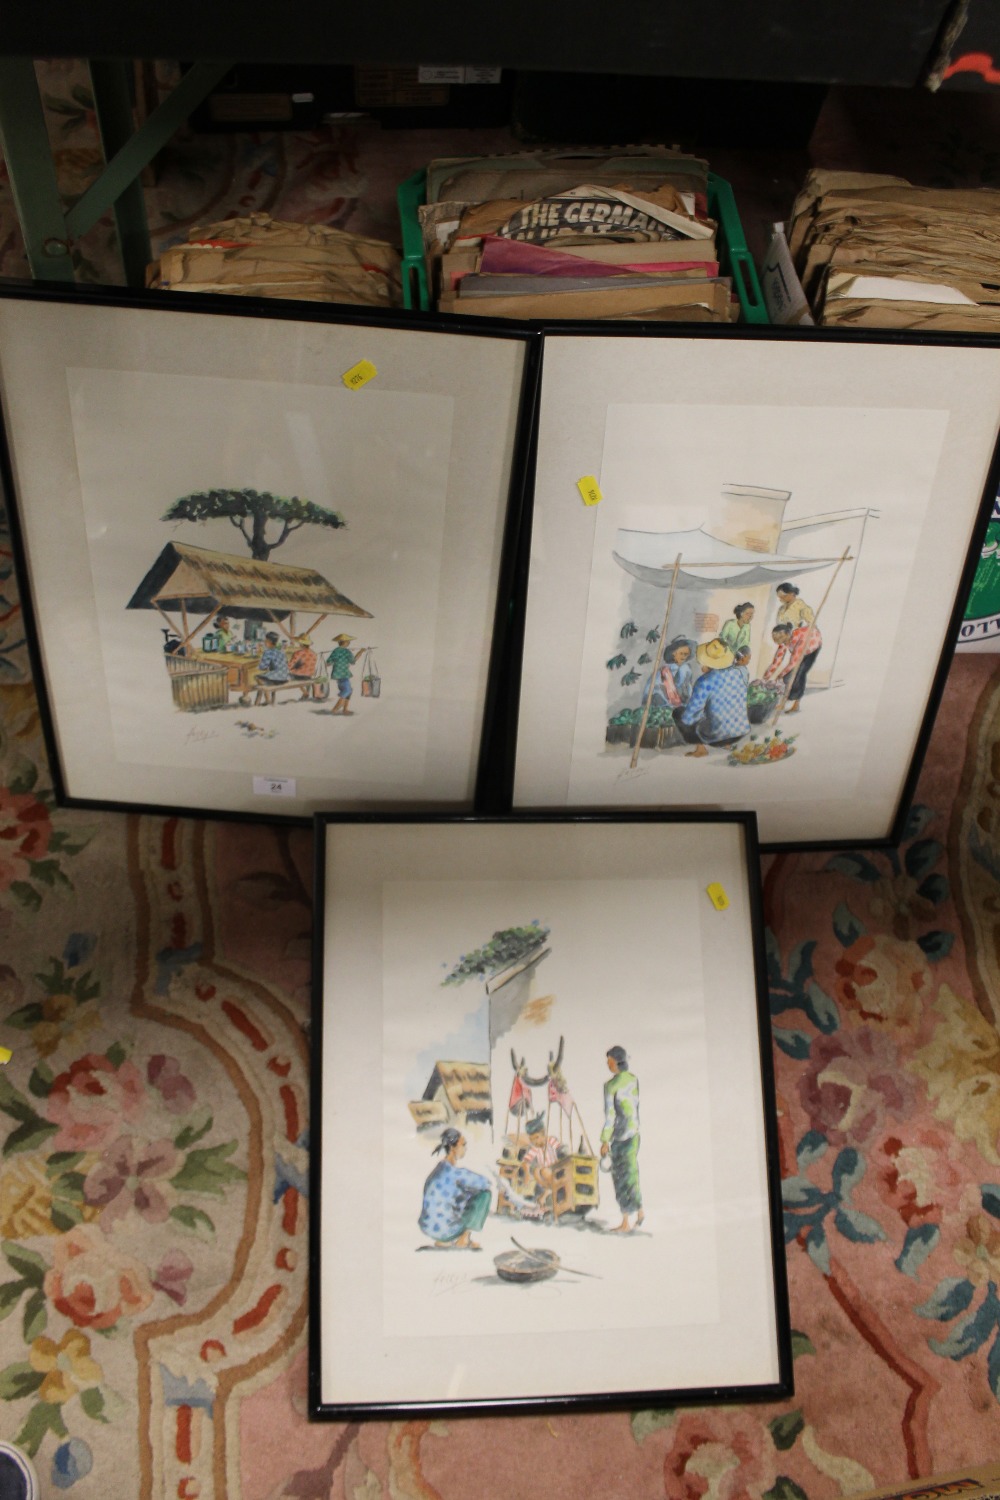 A SET OF THREE MIXED MEDIA PICTURES OF ASIAN STREET VENDOR SCENES